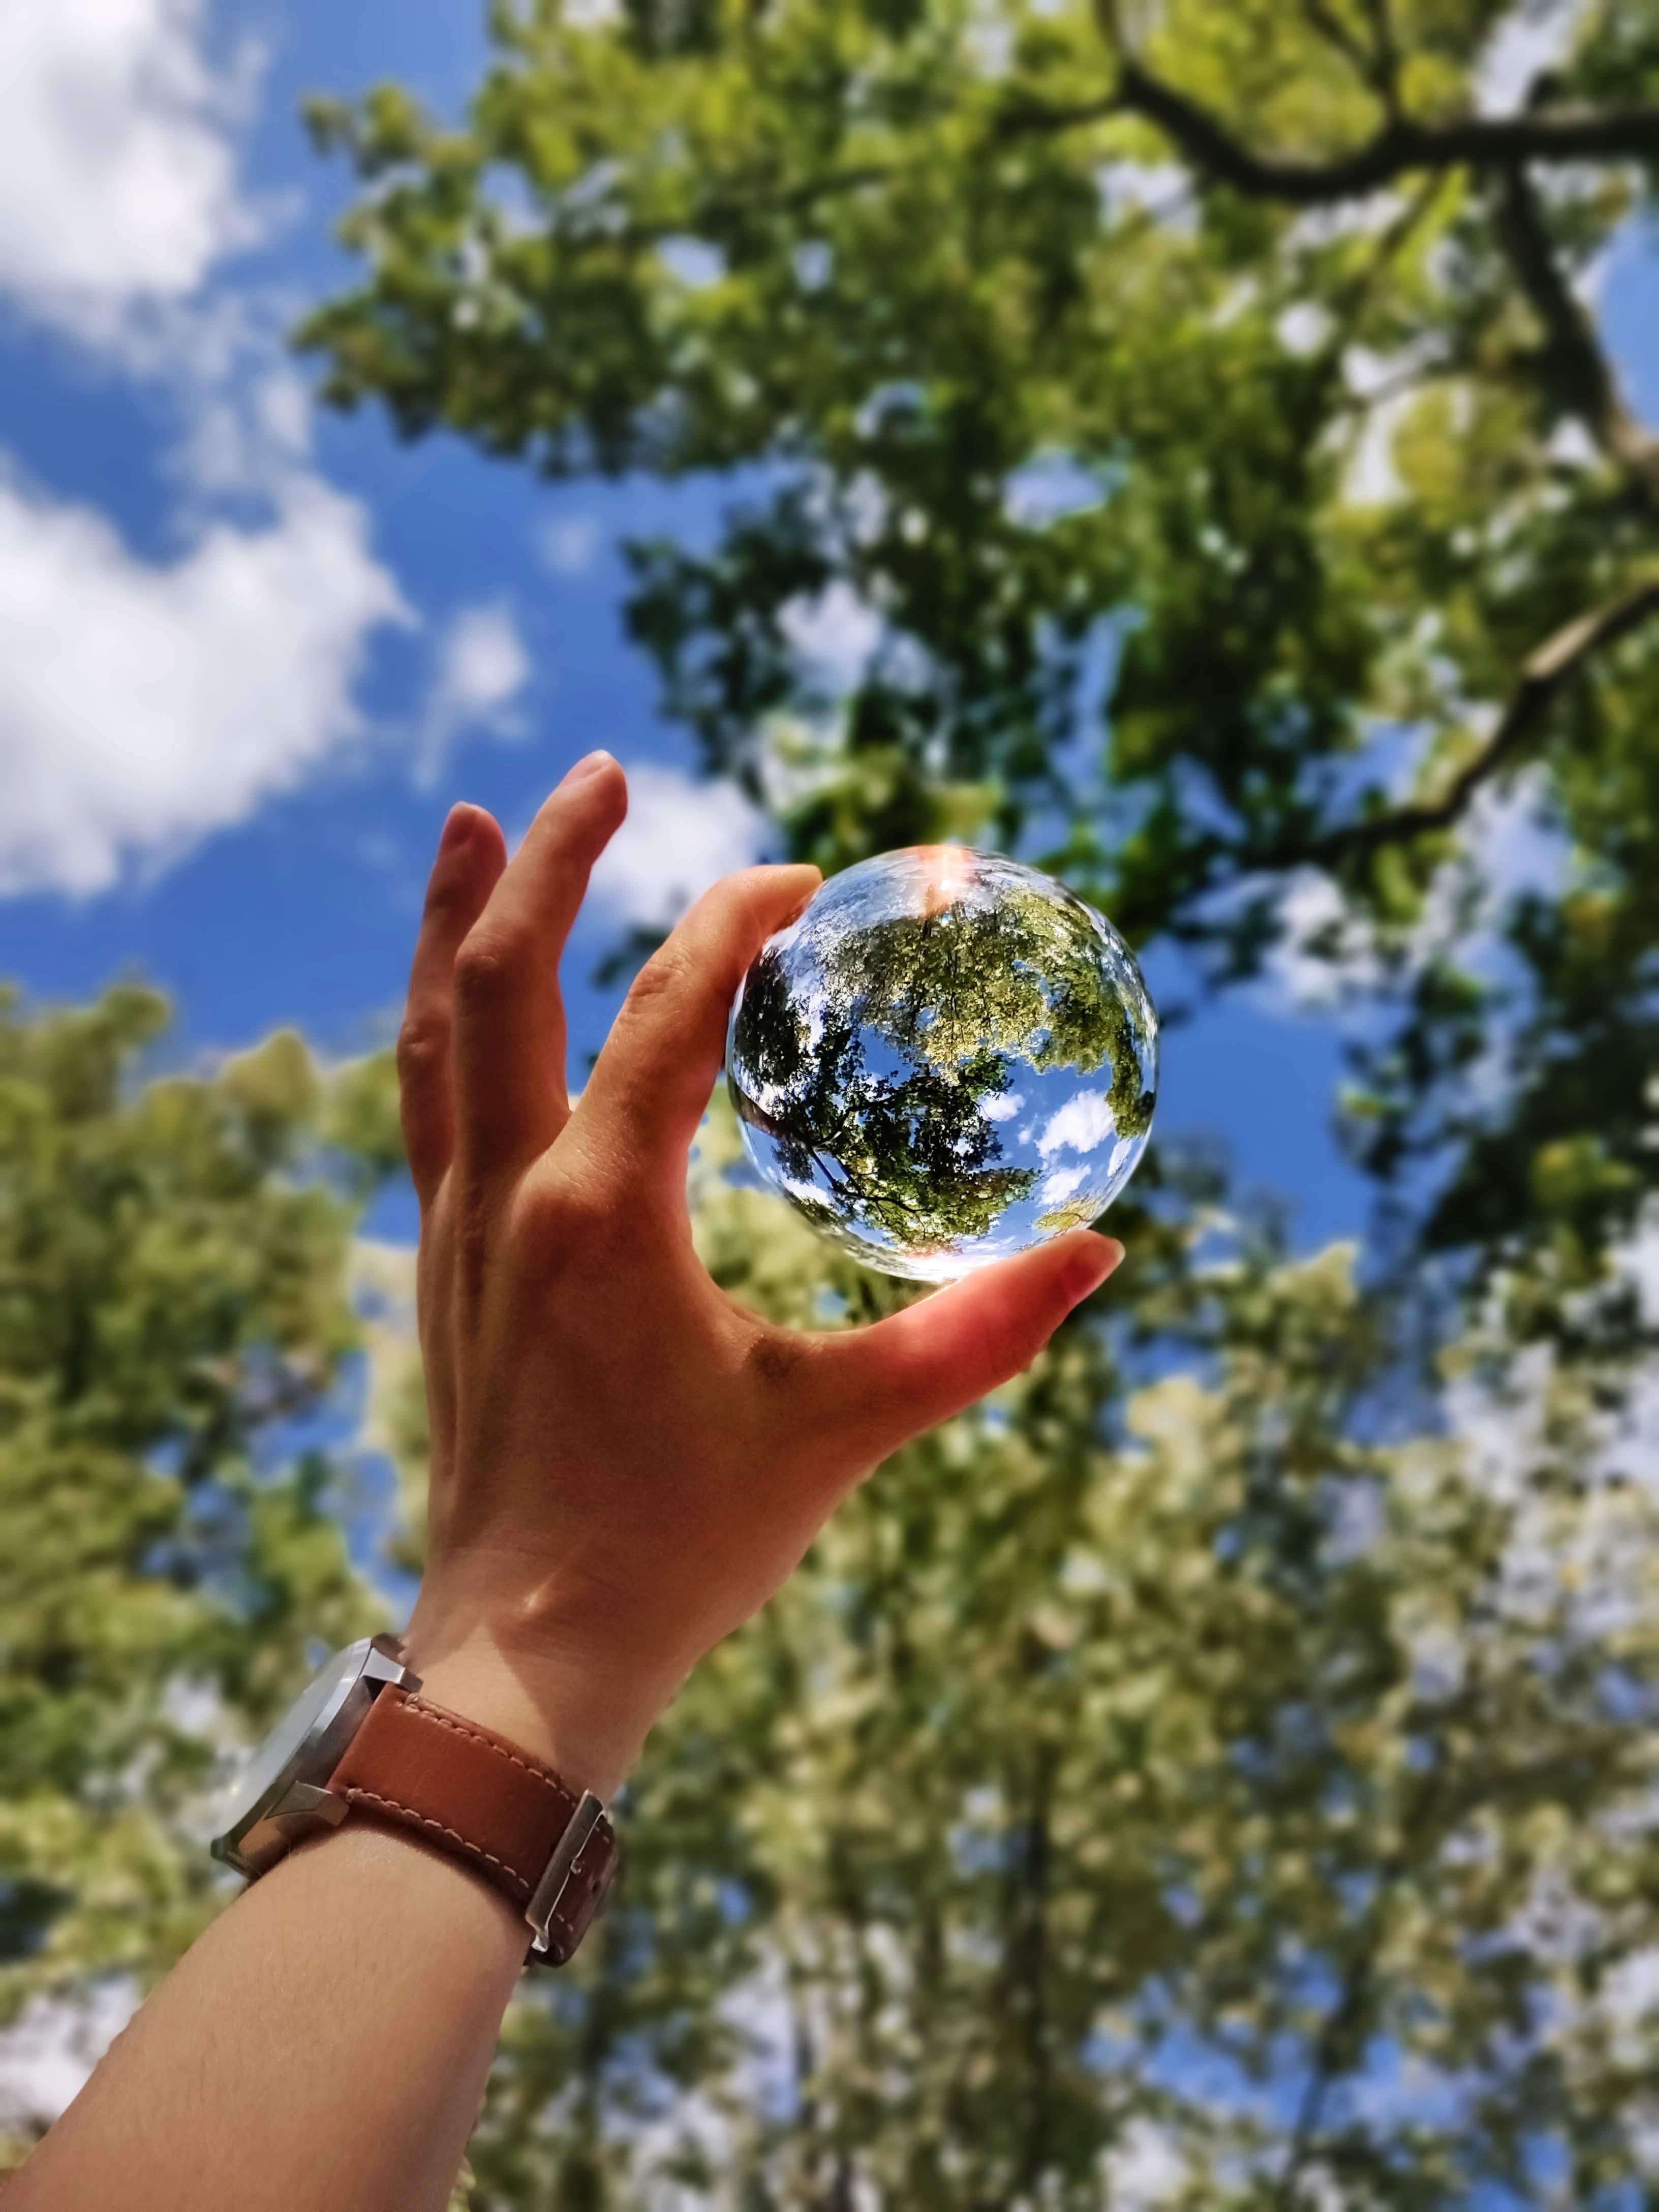 A hand holding a glass sphere up to a tree with a blue sky in the background. The reflection of the tree and sky in the ball makes it look like a globe.